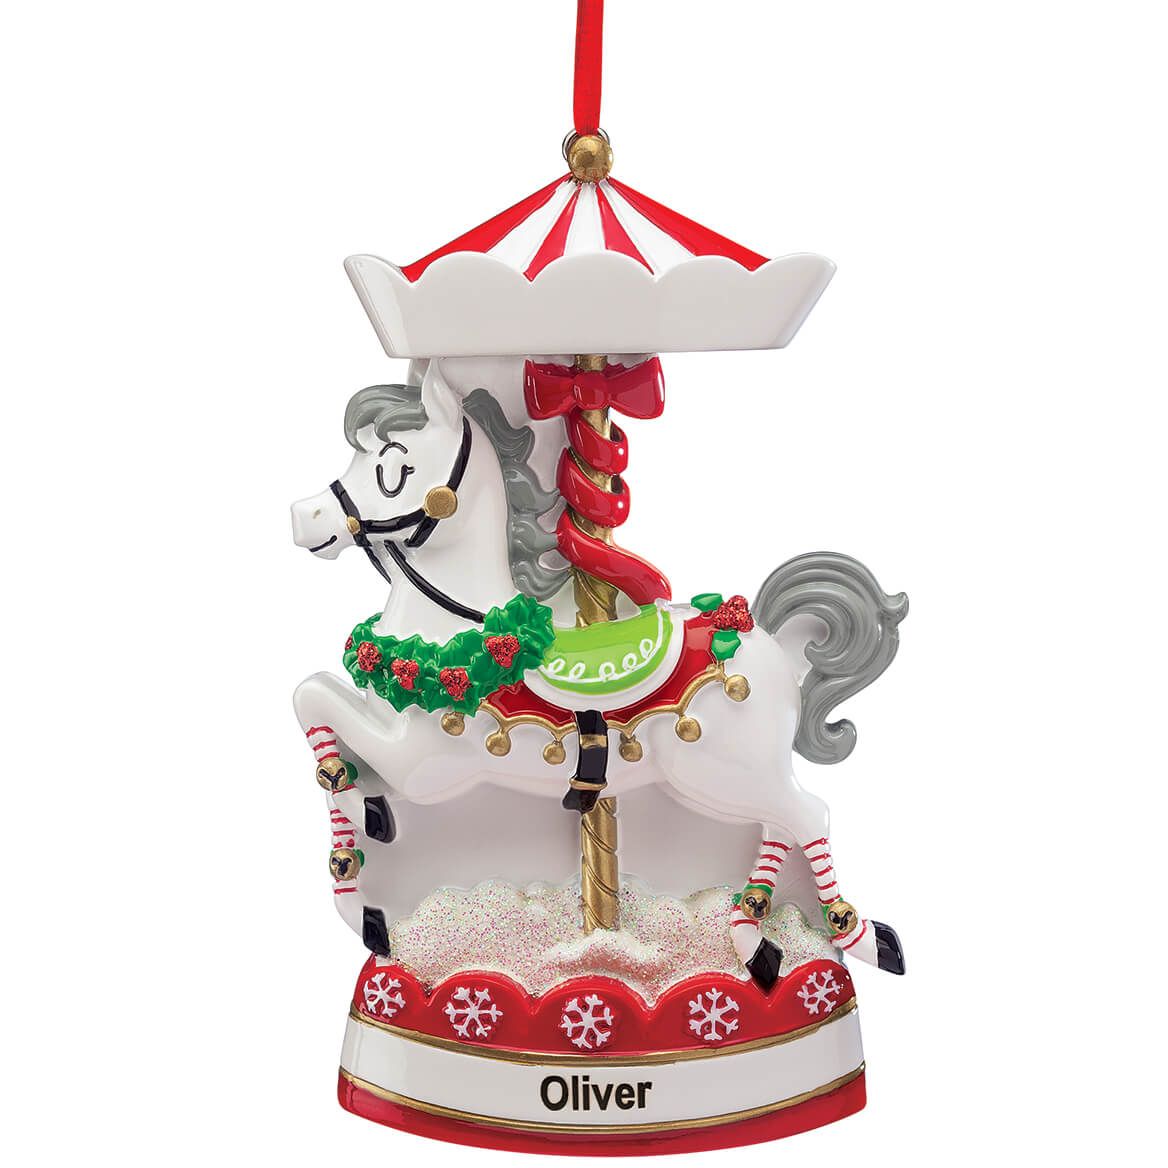 Personalized Carousel Ornament + '-' + 373809